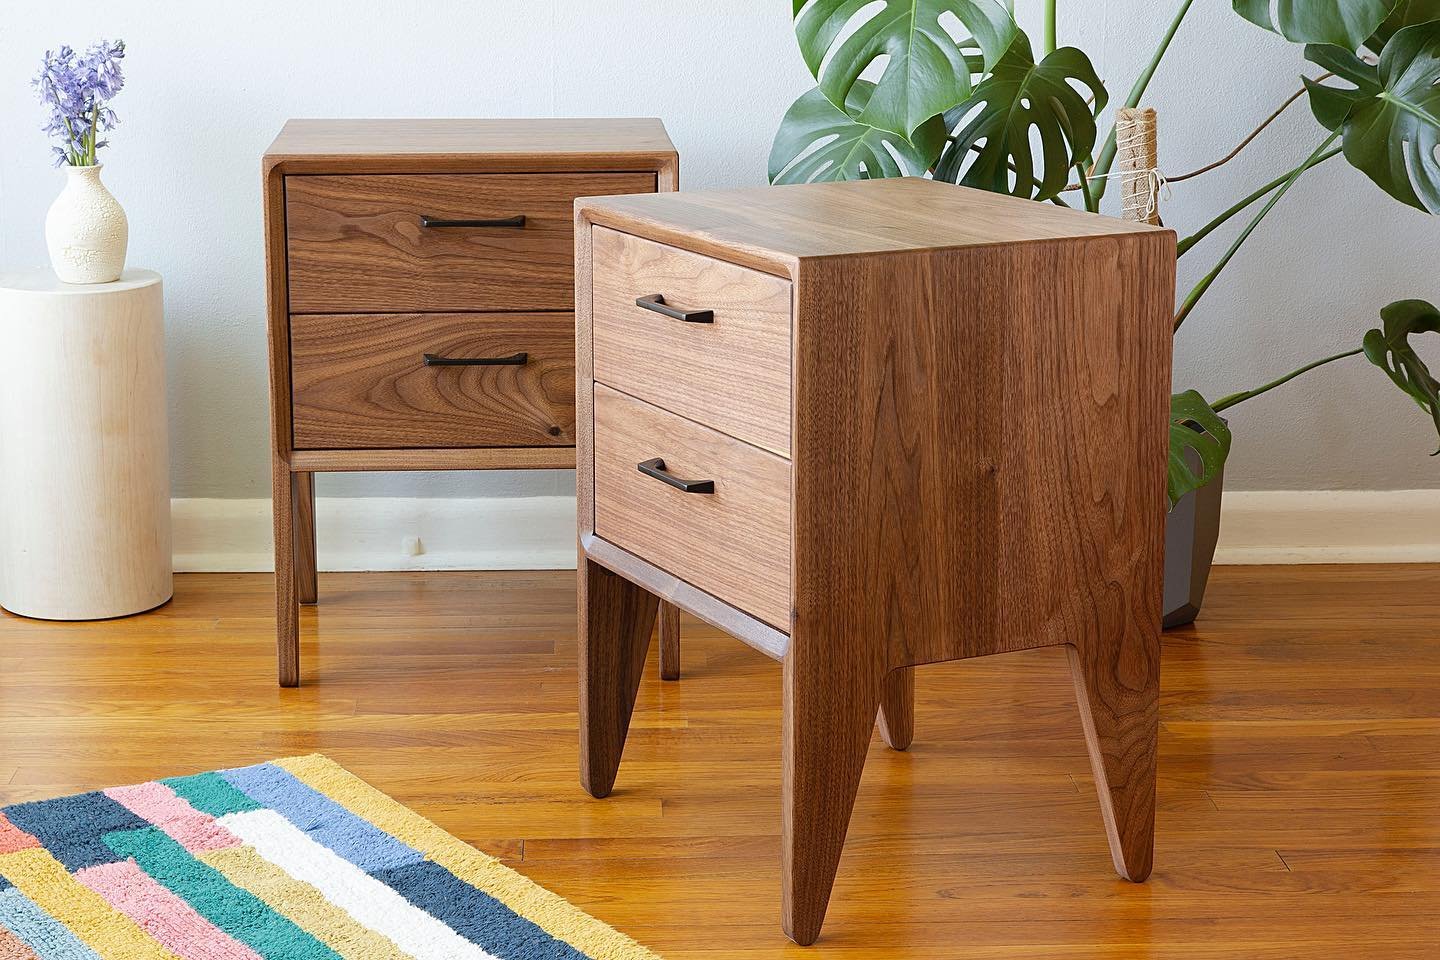 Checkout the latest iteration of our bedside tables, The Willard Nightstand! Designed to match our popular Willard Bed Frame, they carry forward details like mitered case construction for a continuous &ldquo;waterfall&rdquo; grain wrap cabinet, and a